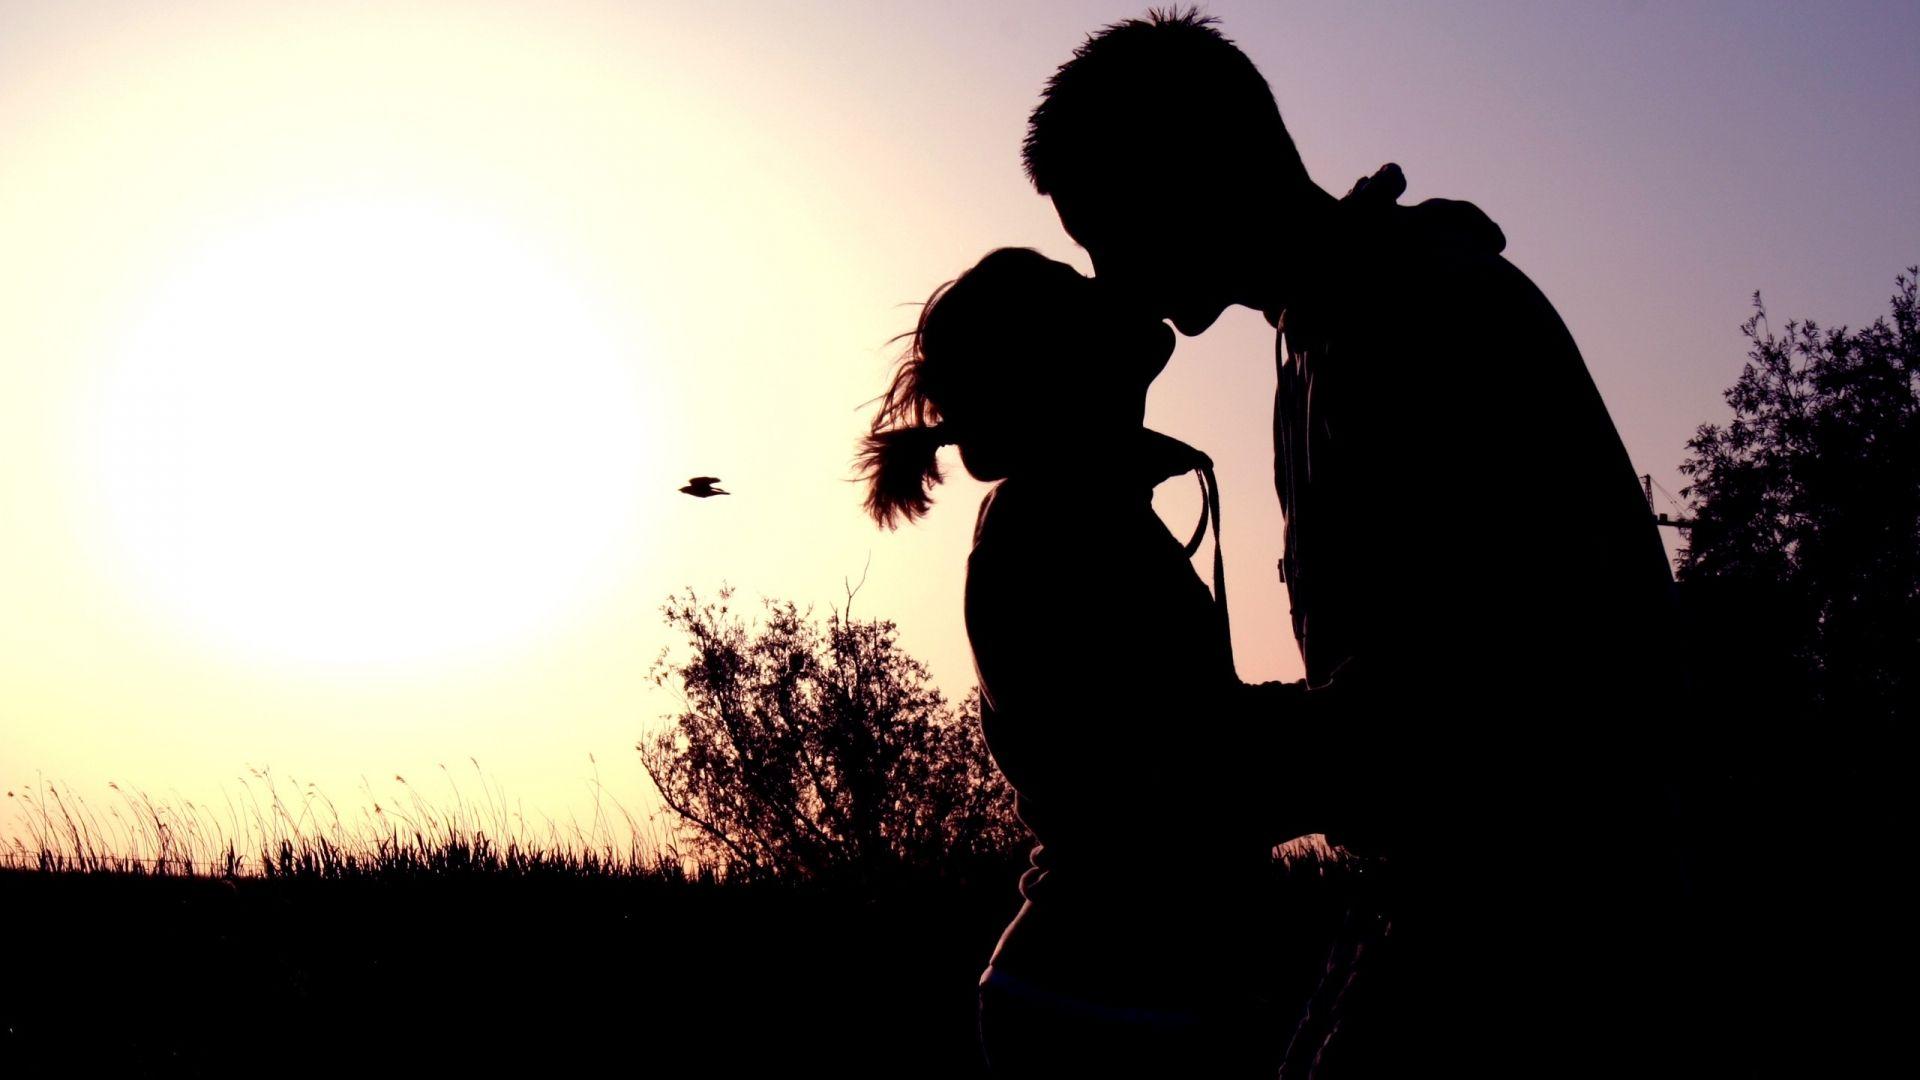 Wallpaper.wiki Couple Shadow Sunset Kissing PIC WPB0011922